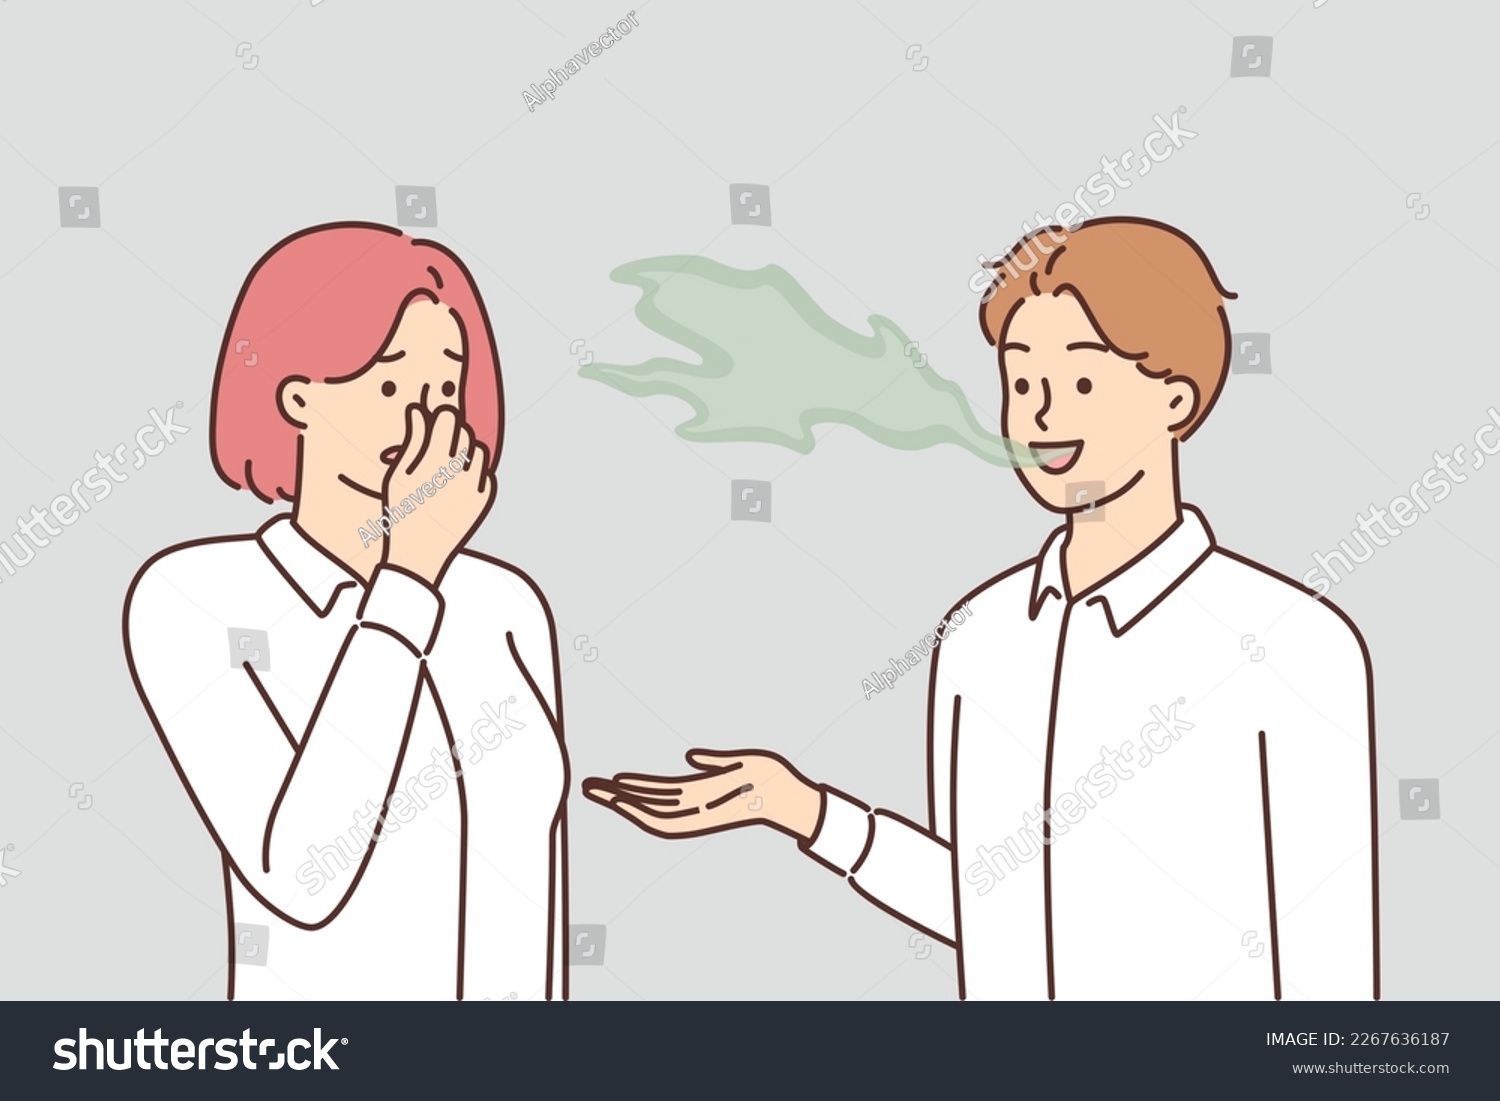 SVG of Woman covers nose with hand, feels discomfort communicating with man due to bad breath. Guy with bad breath not brushing teeth causes problems for others after refusing toothpaste svg